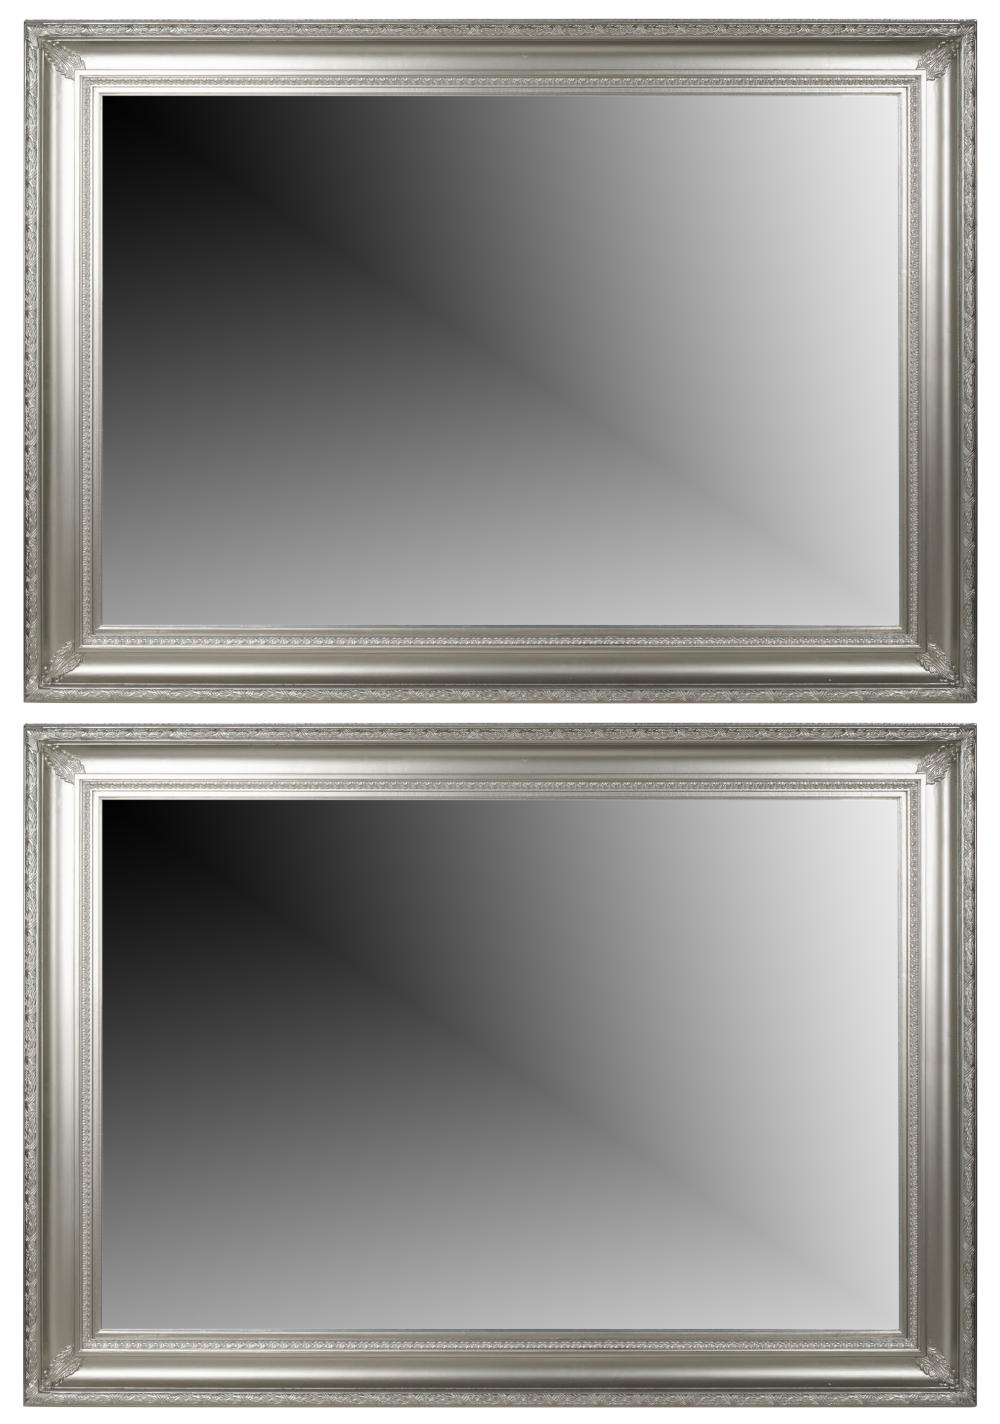 PAIR OF LARGE SILVER-PAINTED WALL